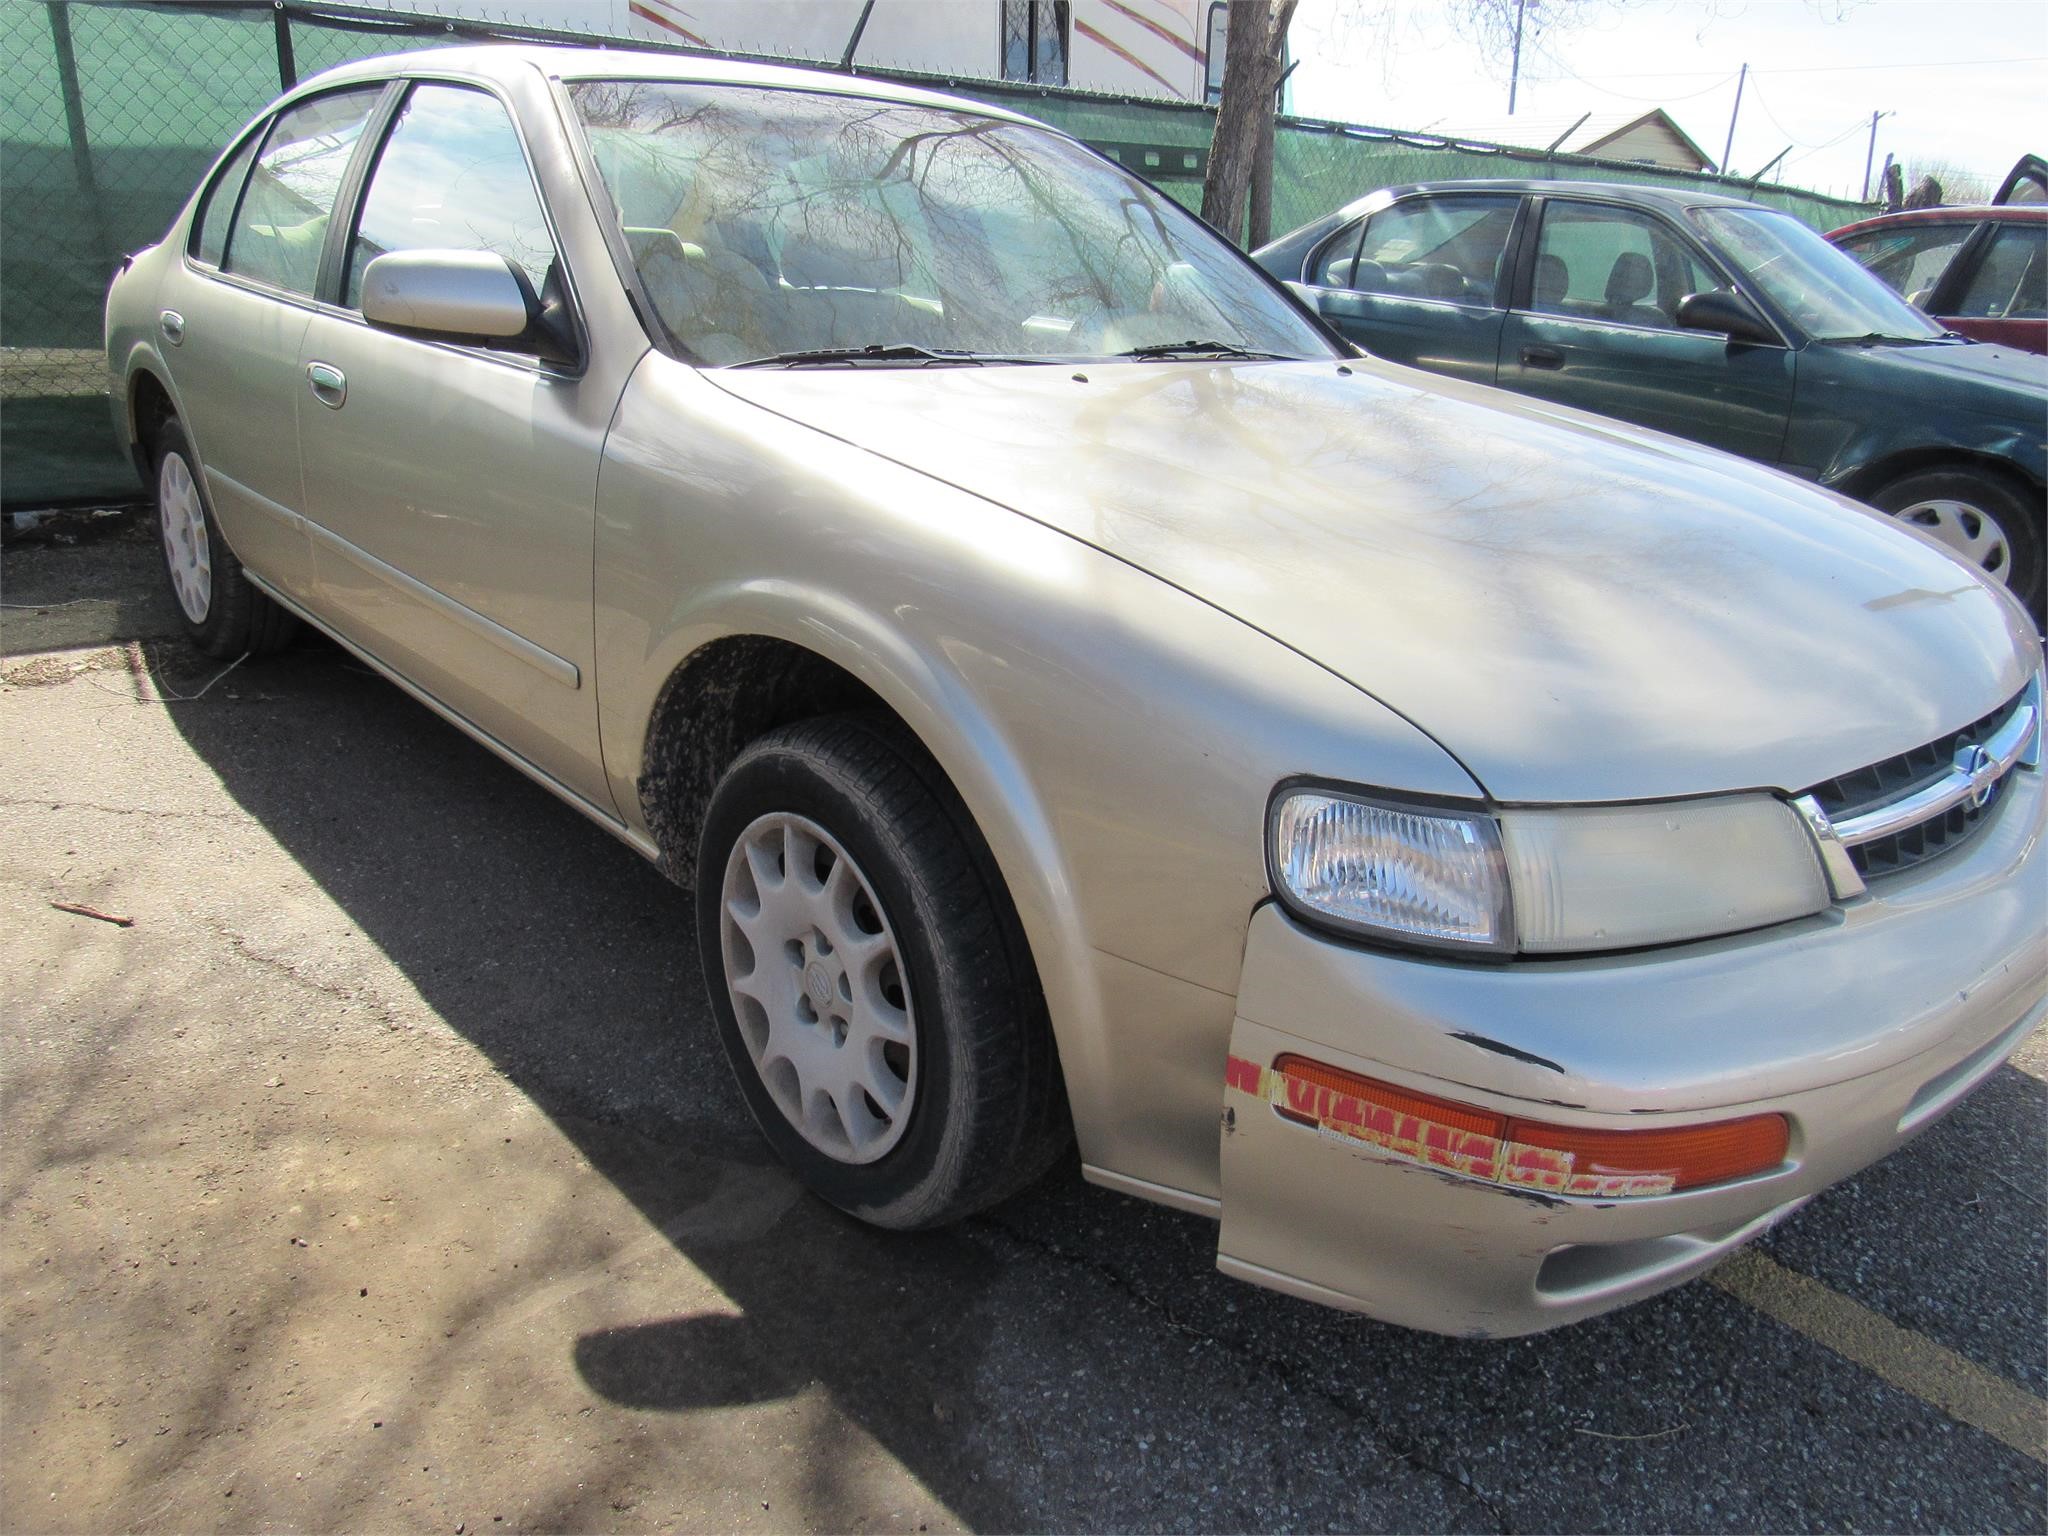 Donated Rides Car Auction March 2019